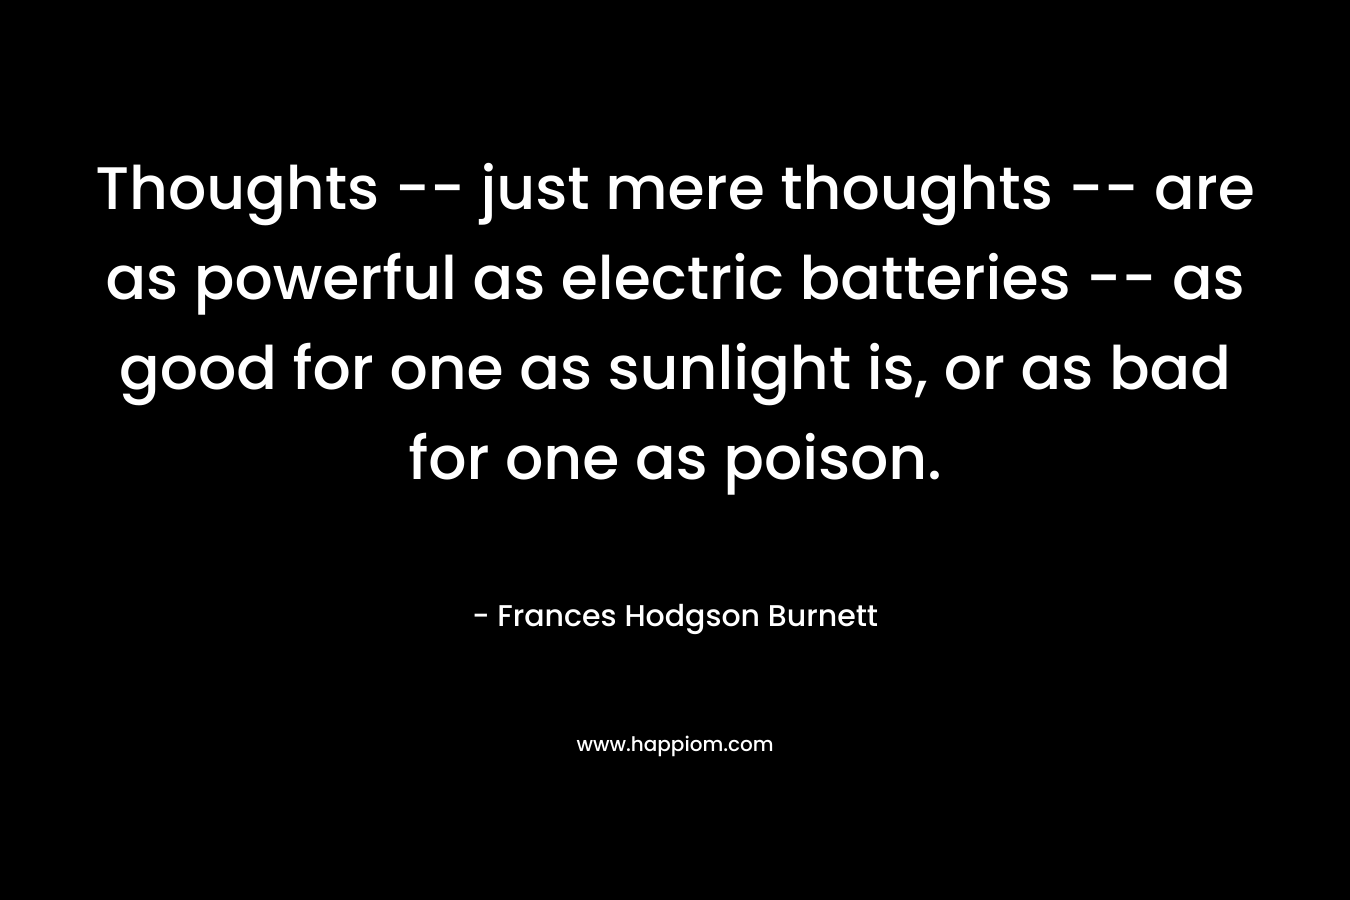 Thoughts -- just mere thoughts -- are as powerful as electric batteries -- as good for one as sunlight is, or as bad for one as poison.